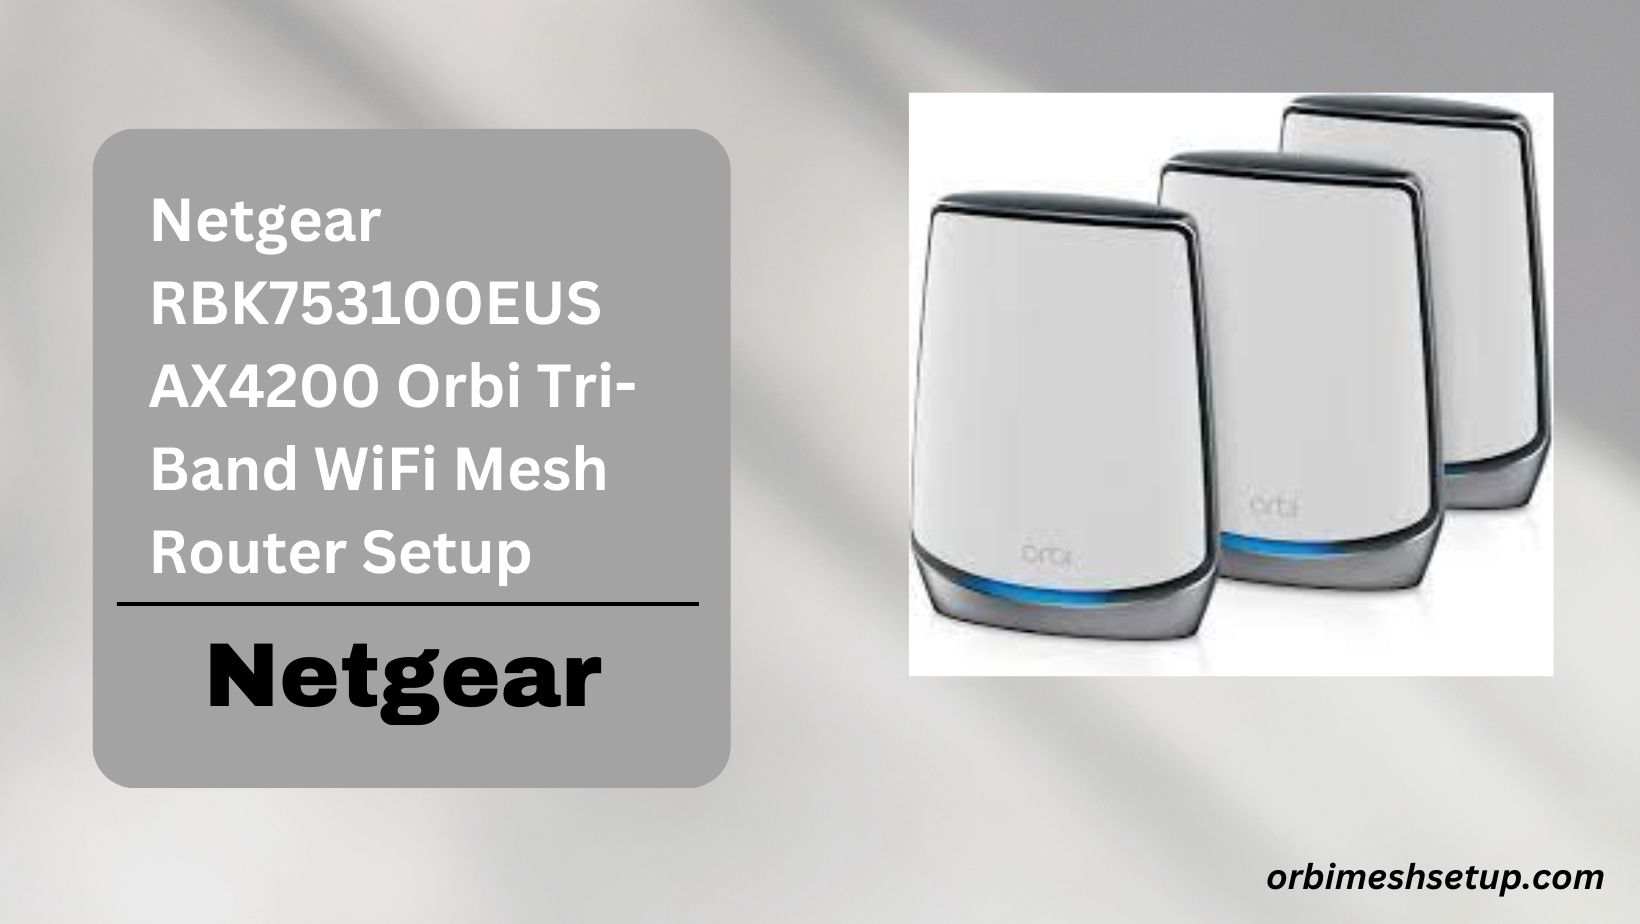 You are currently viewing Netgear RBK753100EUS AX4200 Orbi Tri-Band WiFi Mesh Router Setup: Guide